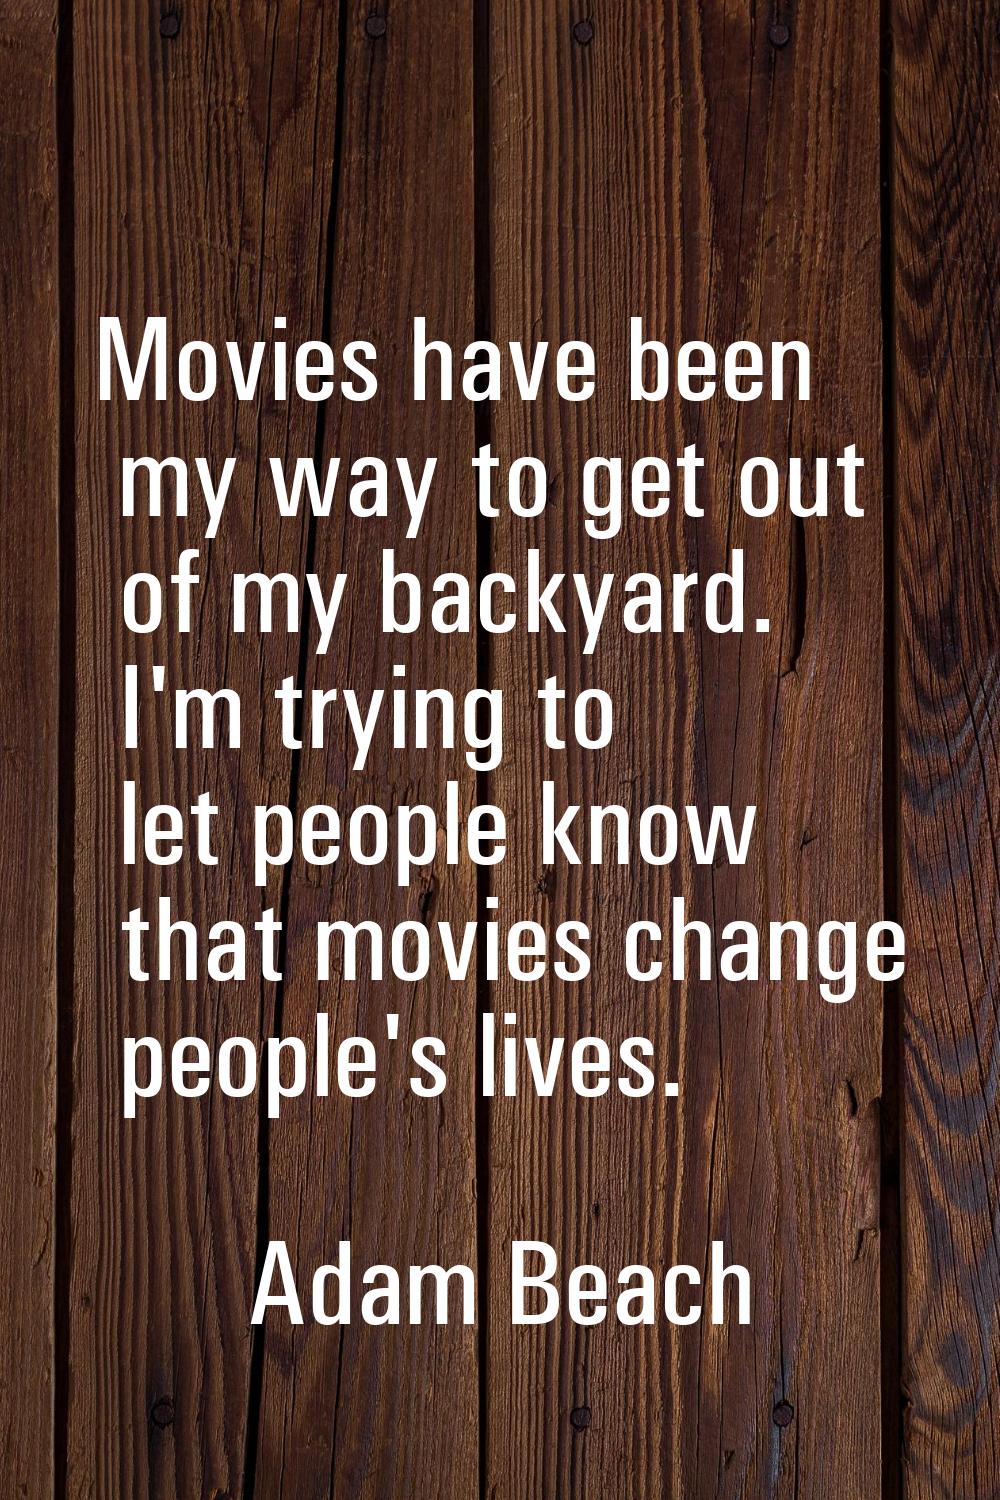 Movies have been my way to get out of my backyard. I'm trying to let people know that movies change